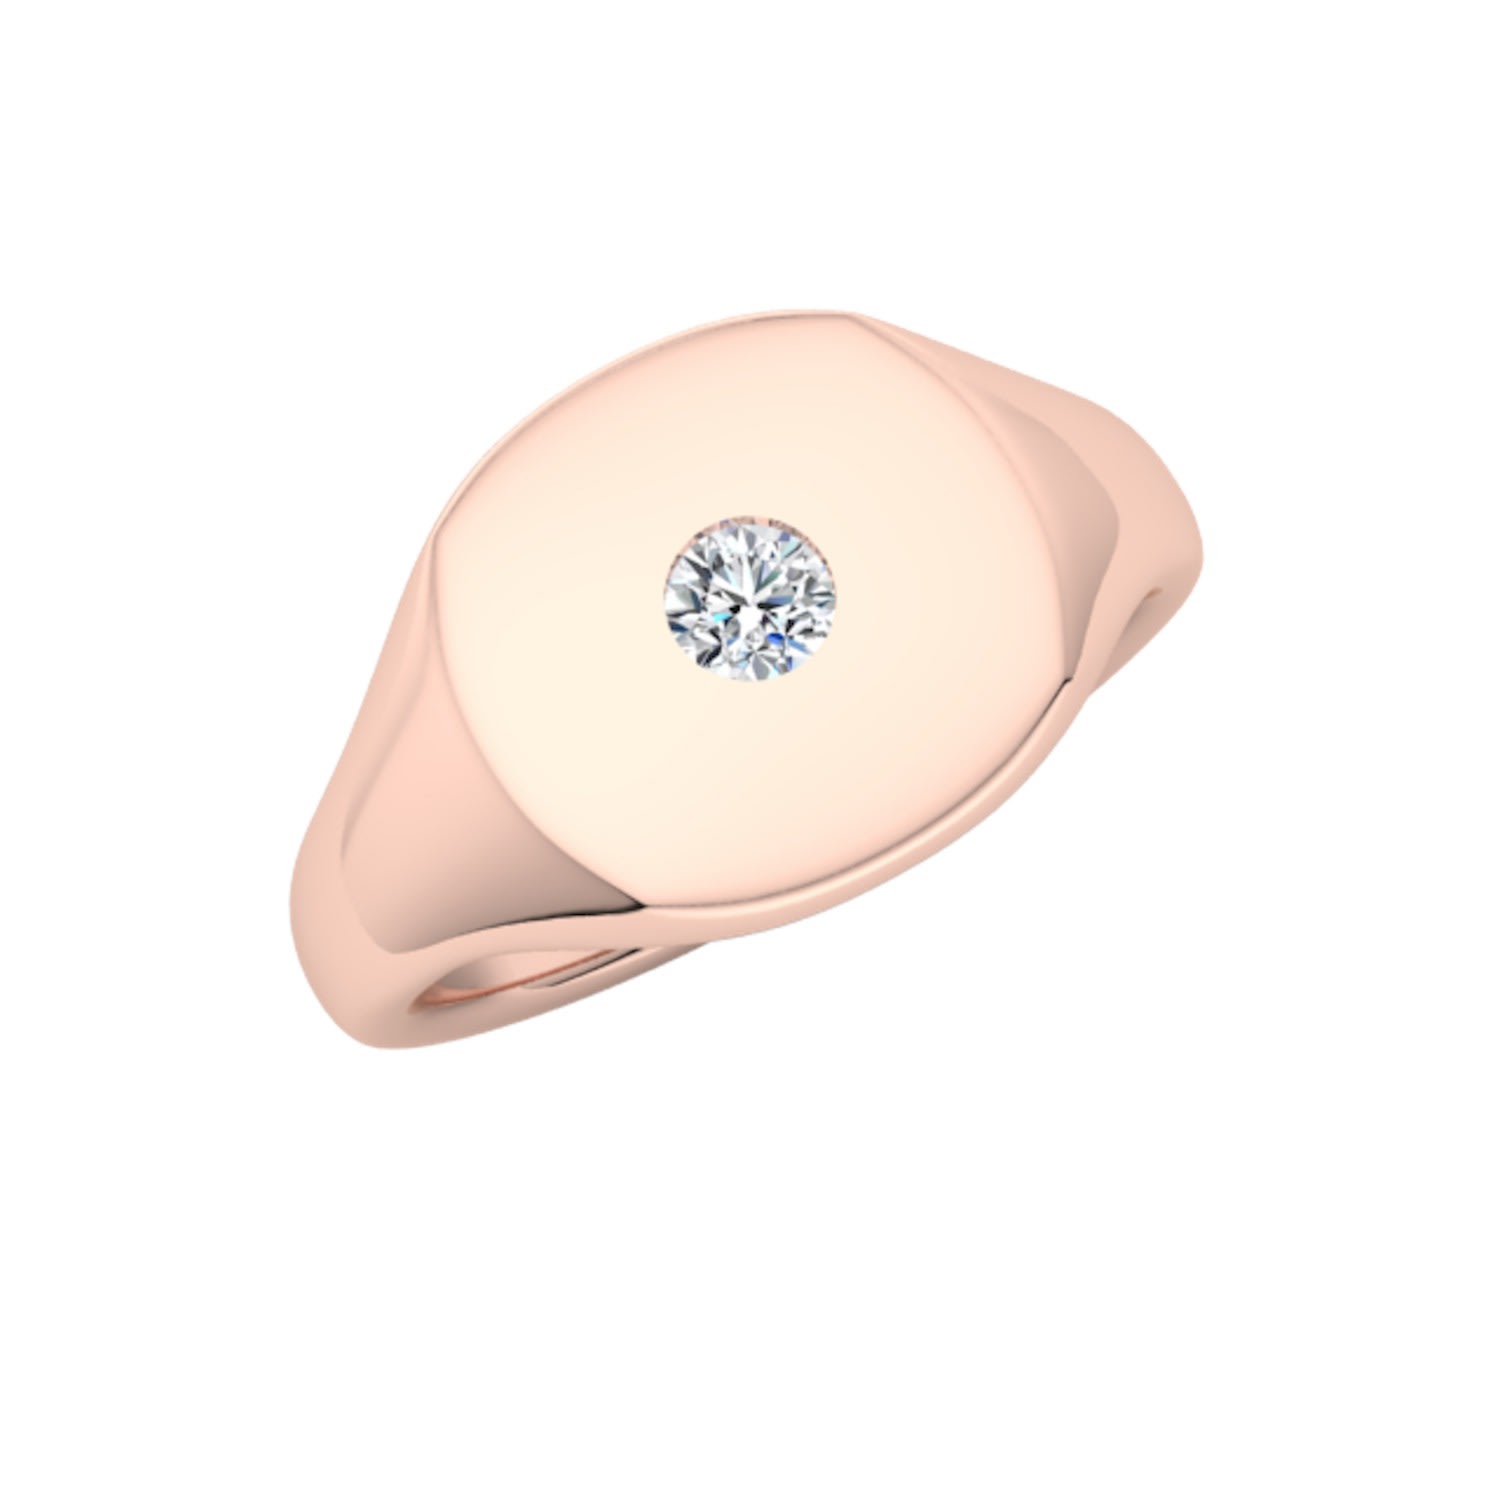 Men's 14K Gold Signet Ring With Diamond Rose Gold Undefined Jewelry